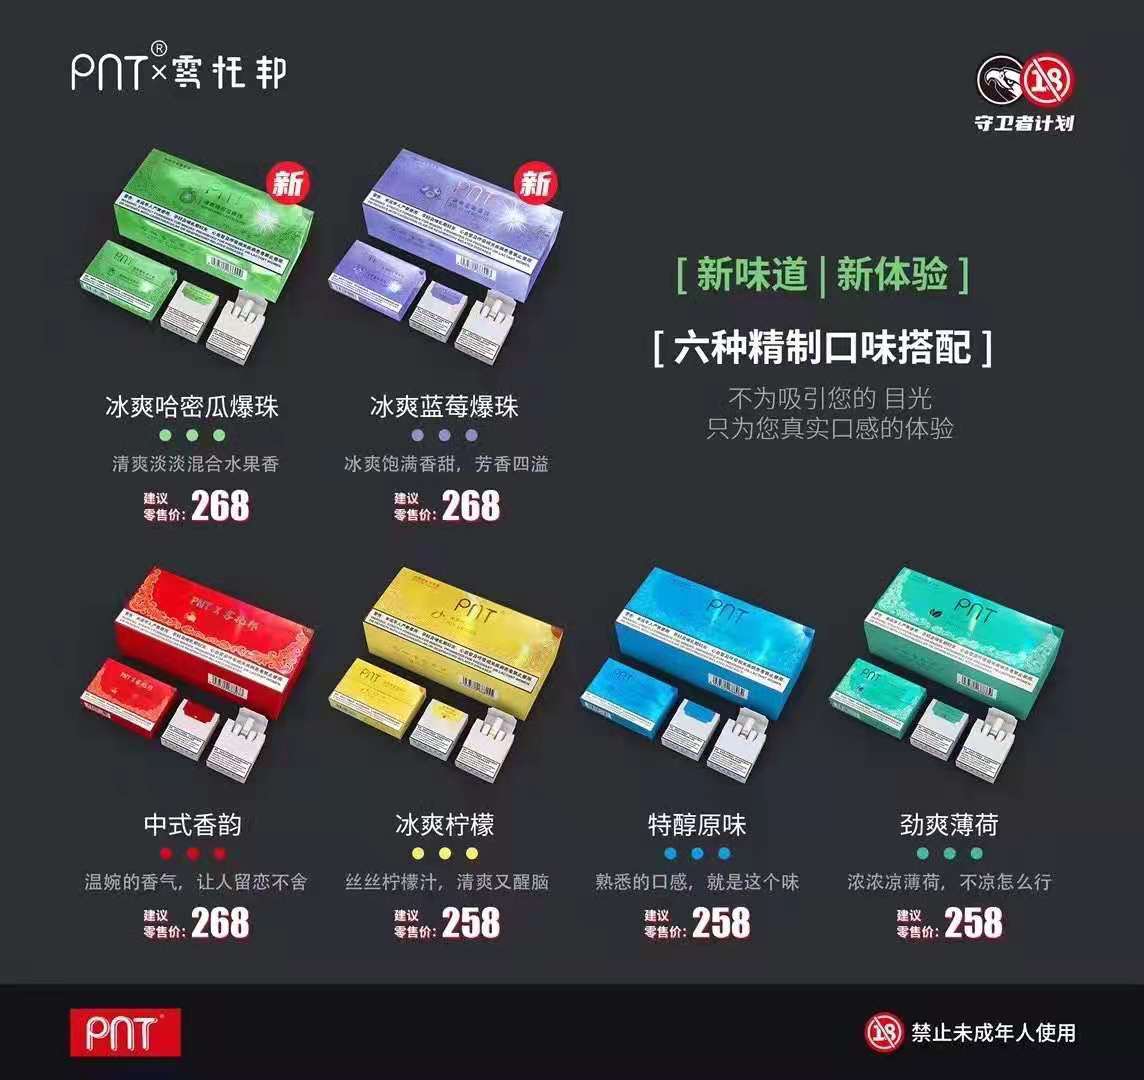 hnb devices sold in china recomendation